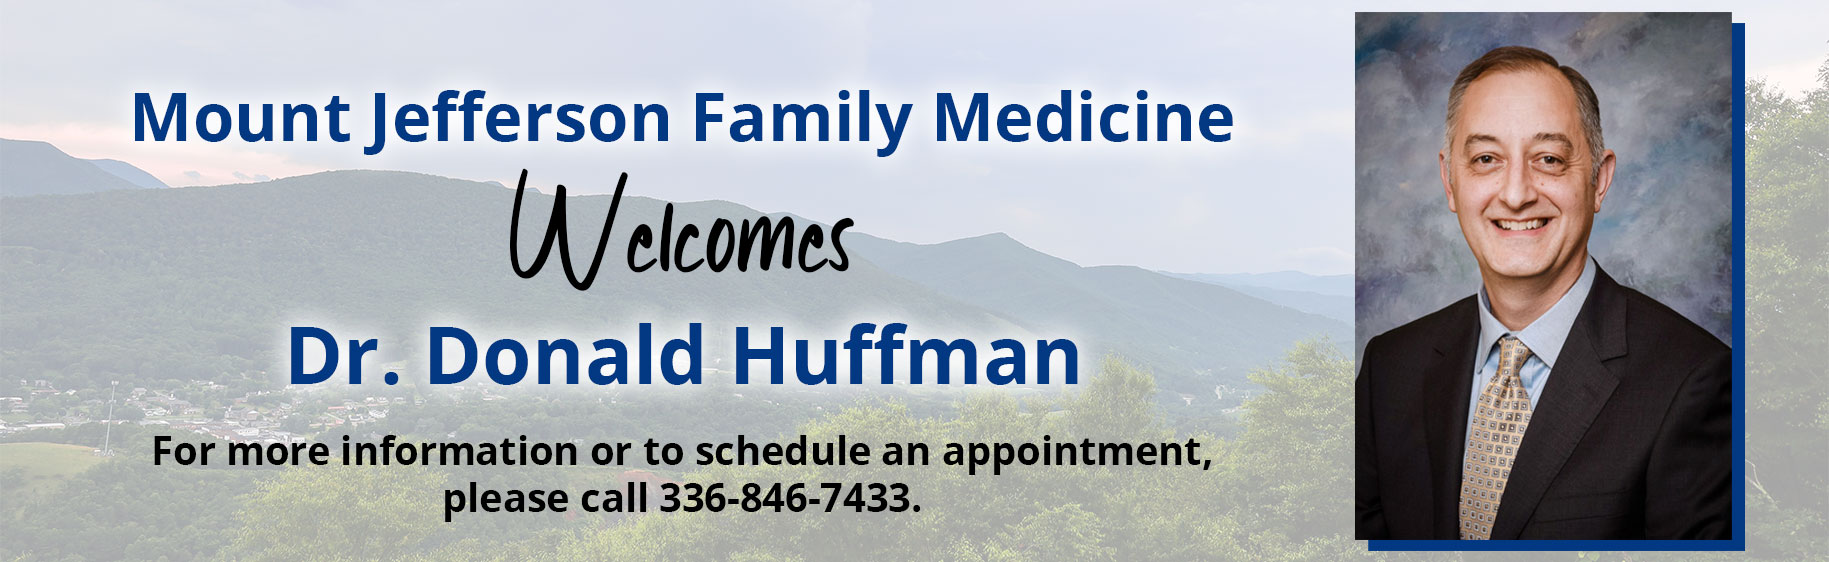 Mount Jefferson Family Medicine Welcomes New Physician 
For more information on Dr. Donald Huffman or to schedule an appointment, please call 336-846-7433.